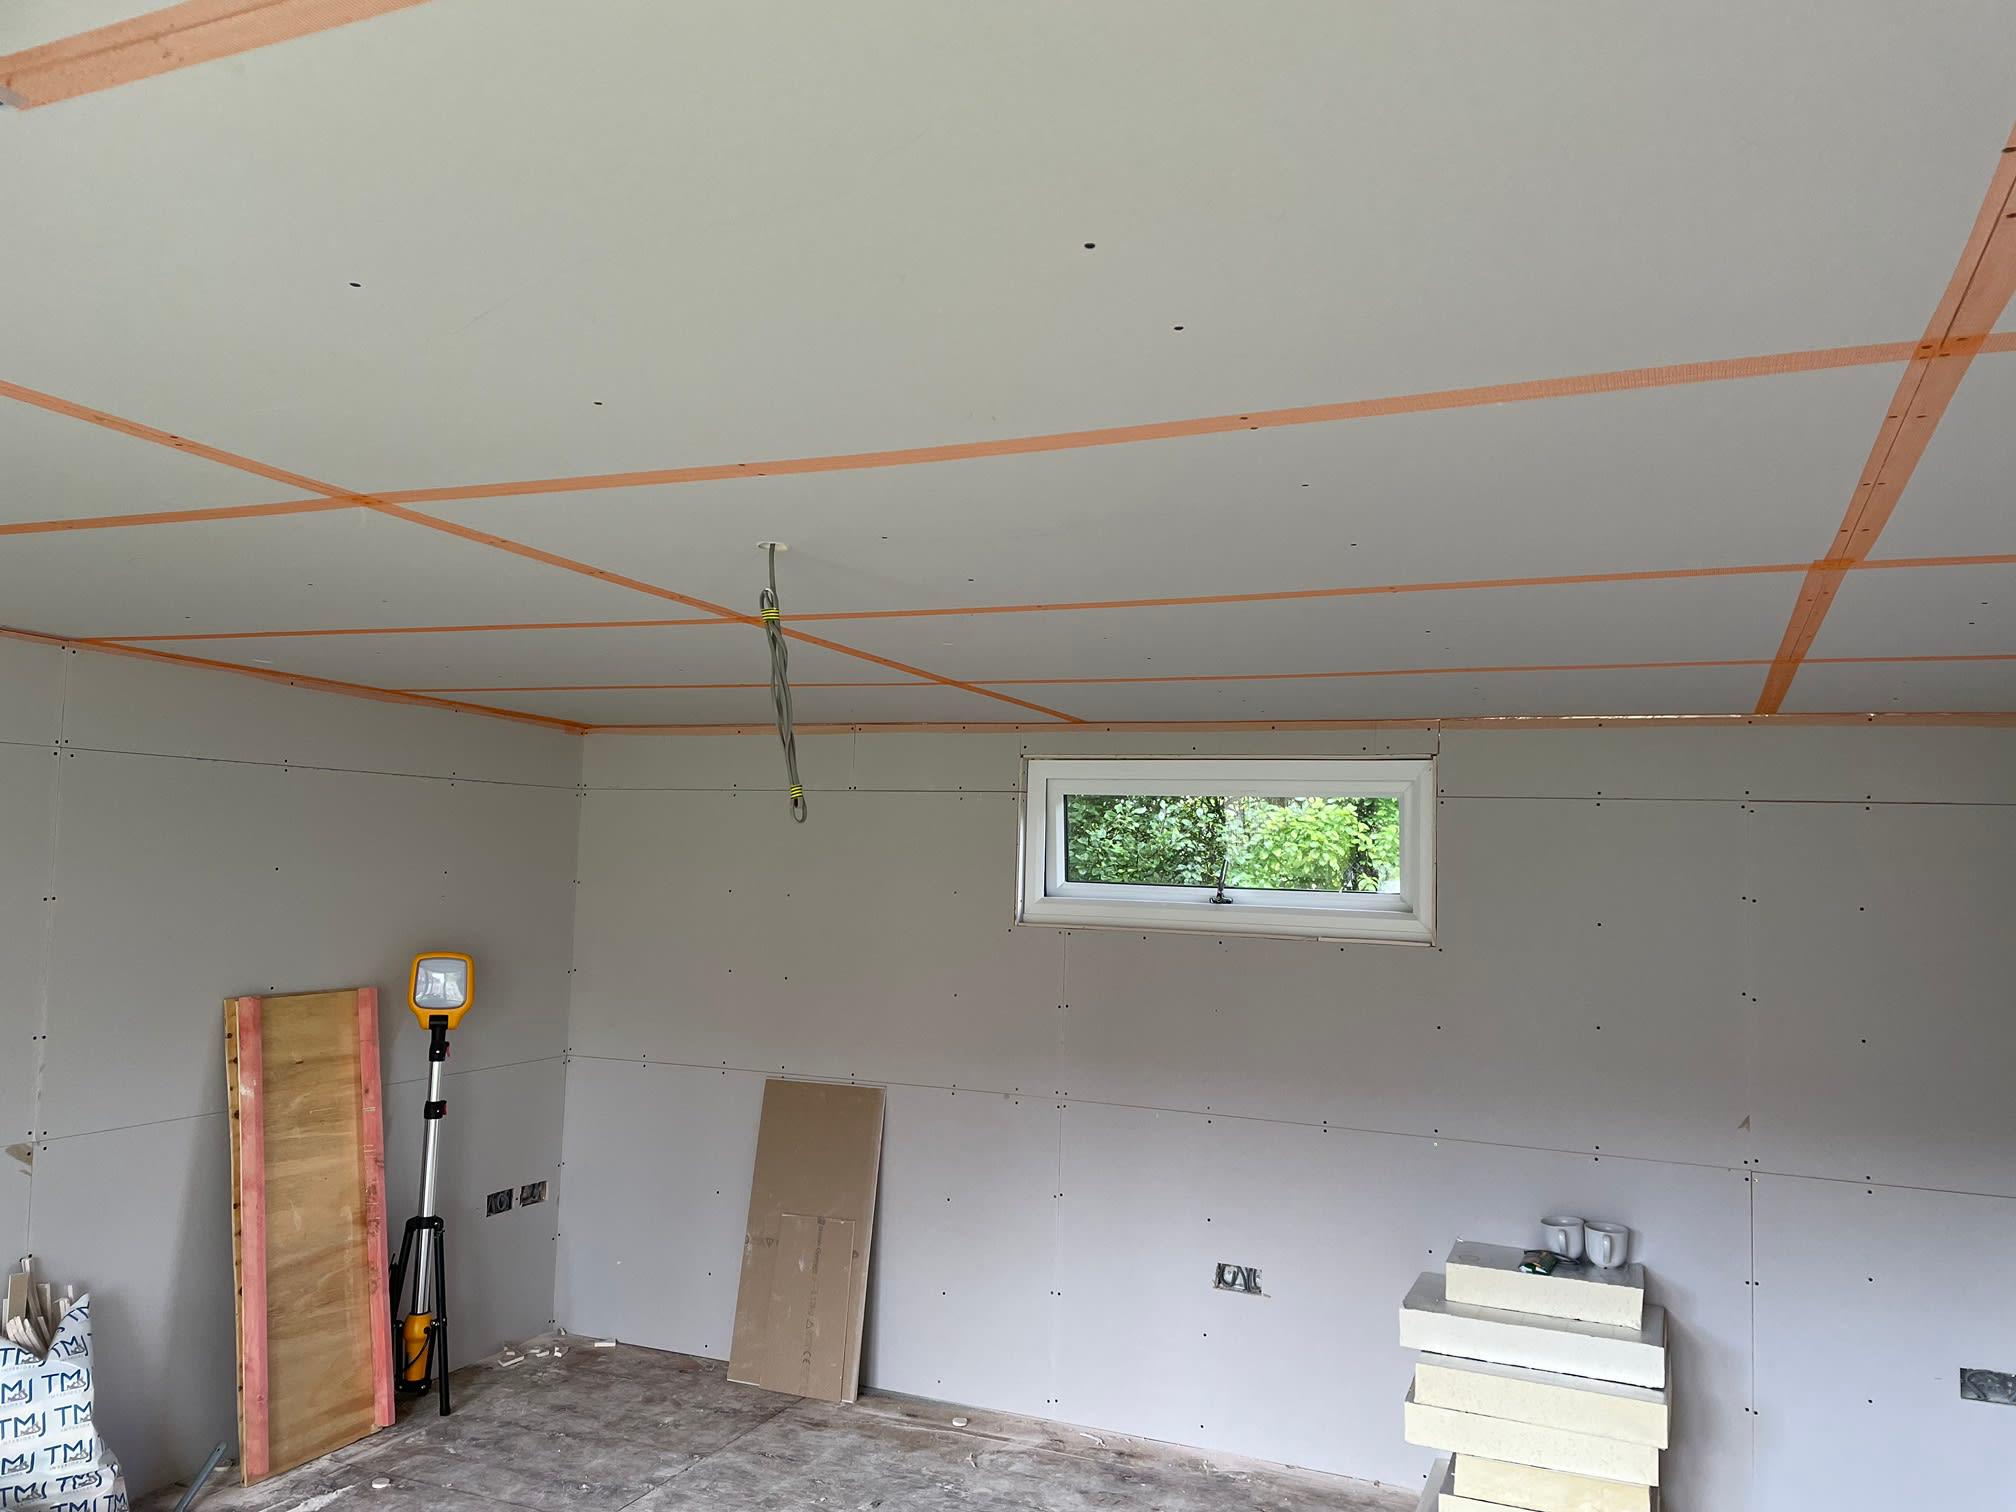 Images Mark Newby Plastering